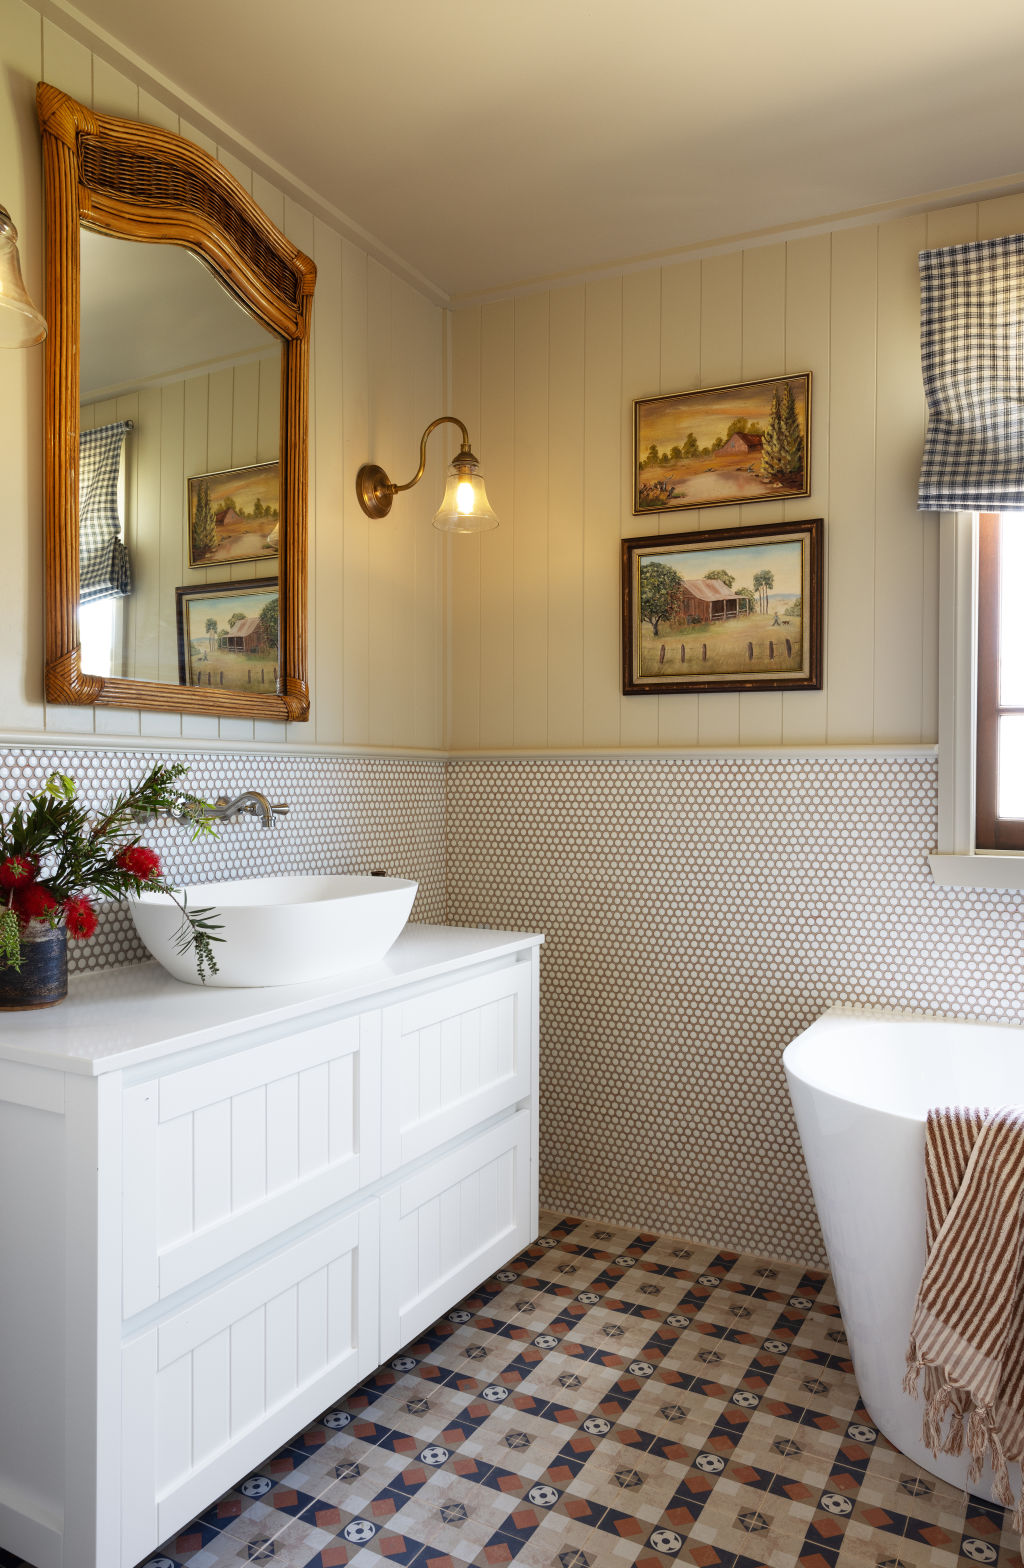 The bathroom was left neutral thanks to its ample natural light. Photo: Louise Roche